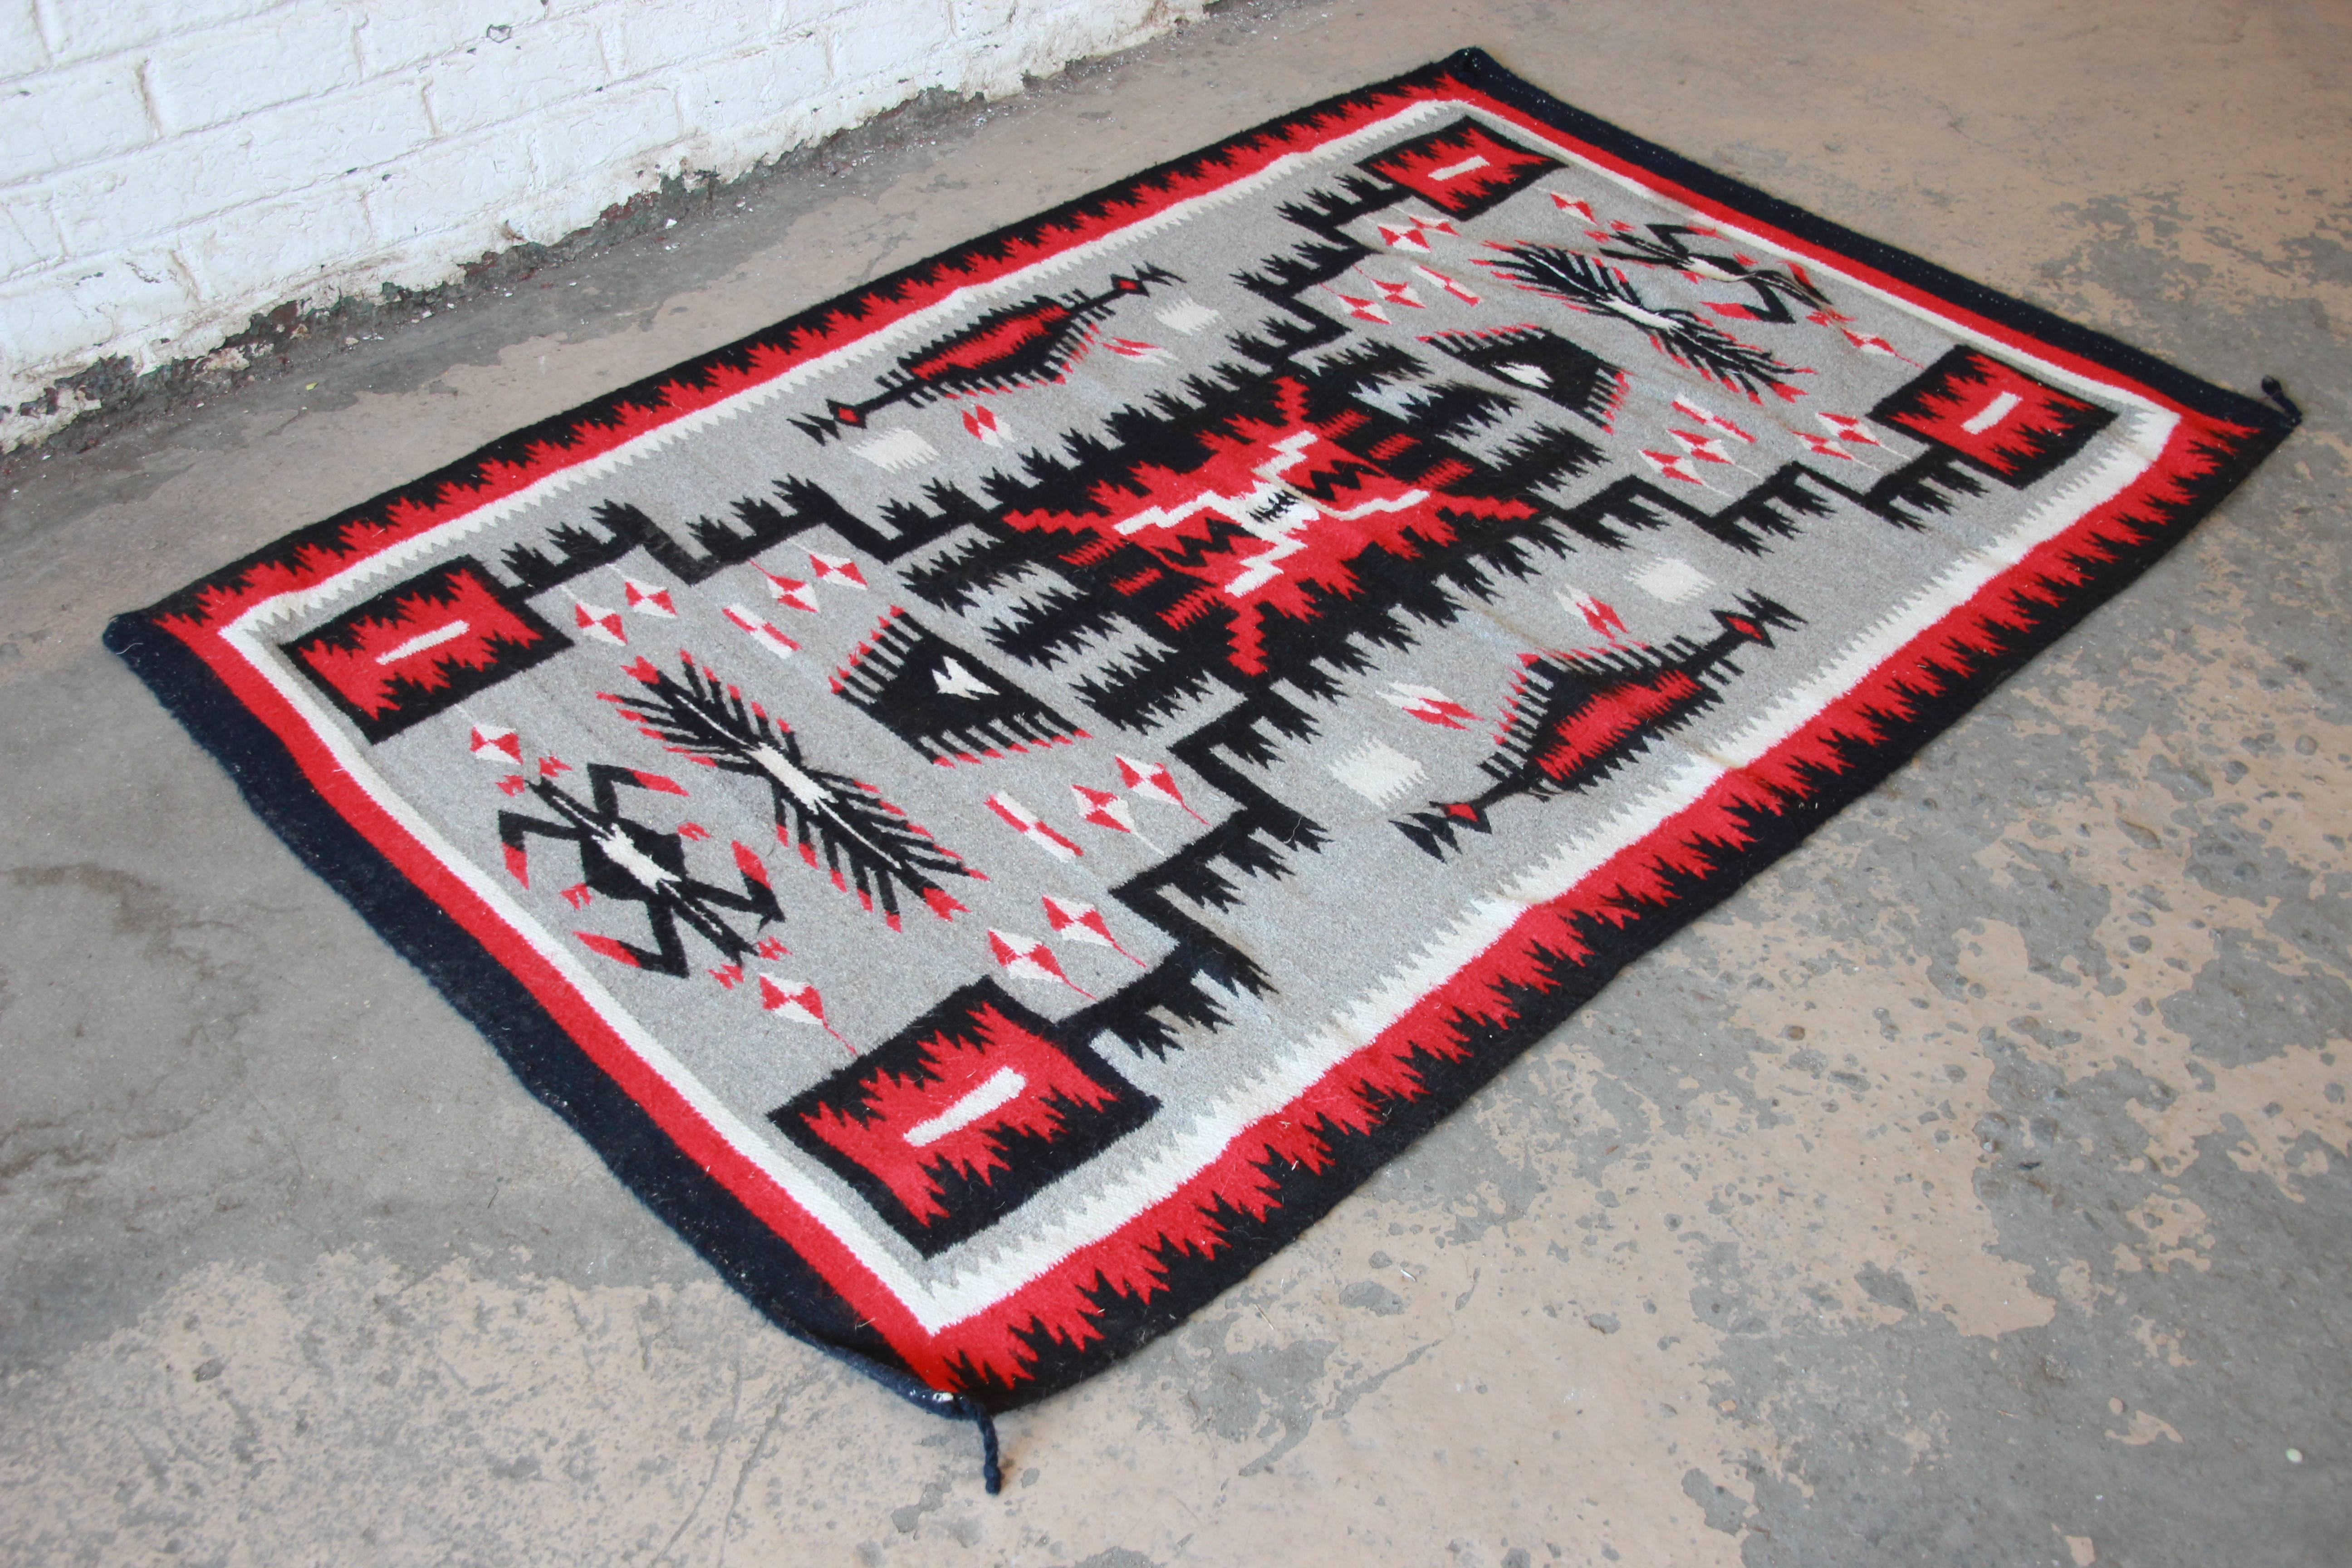 Offering a gorgeous vintage Navajo wool rug. The rug features a unique geometric design, with a gray field and black, red, and white accent colors. The weaving consists of naturally dyed, homespun yarn. Likely woven, circa 1920s. The perfect